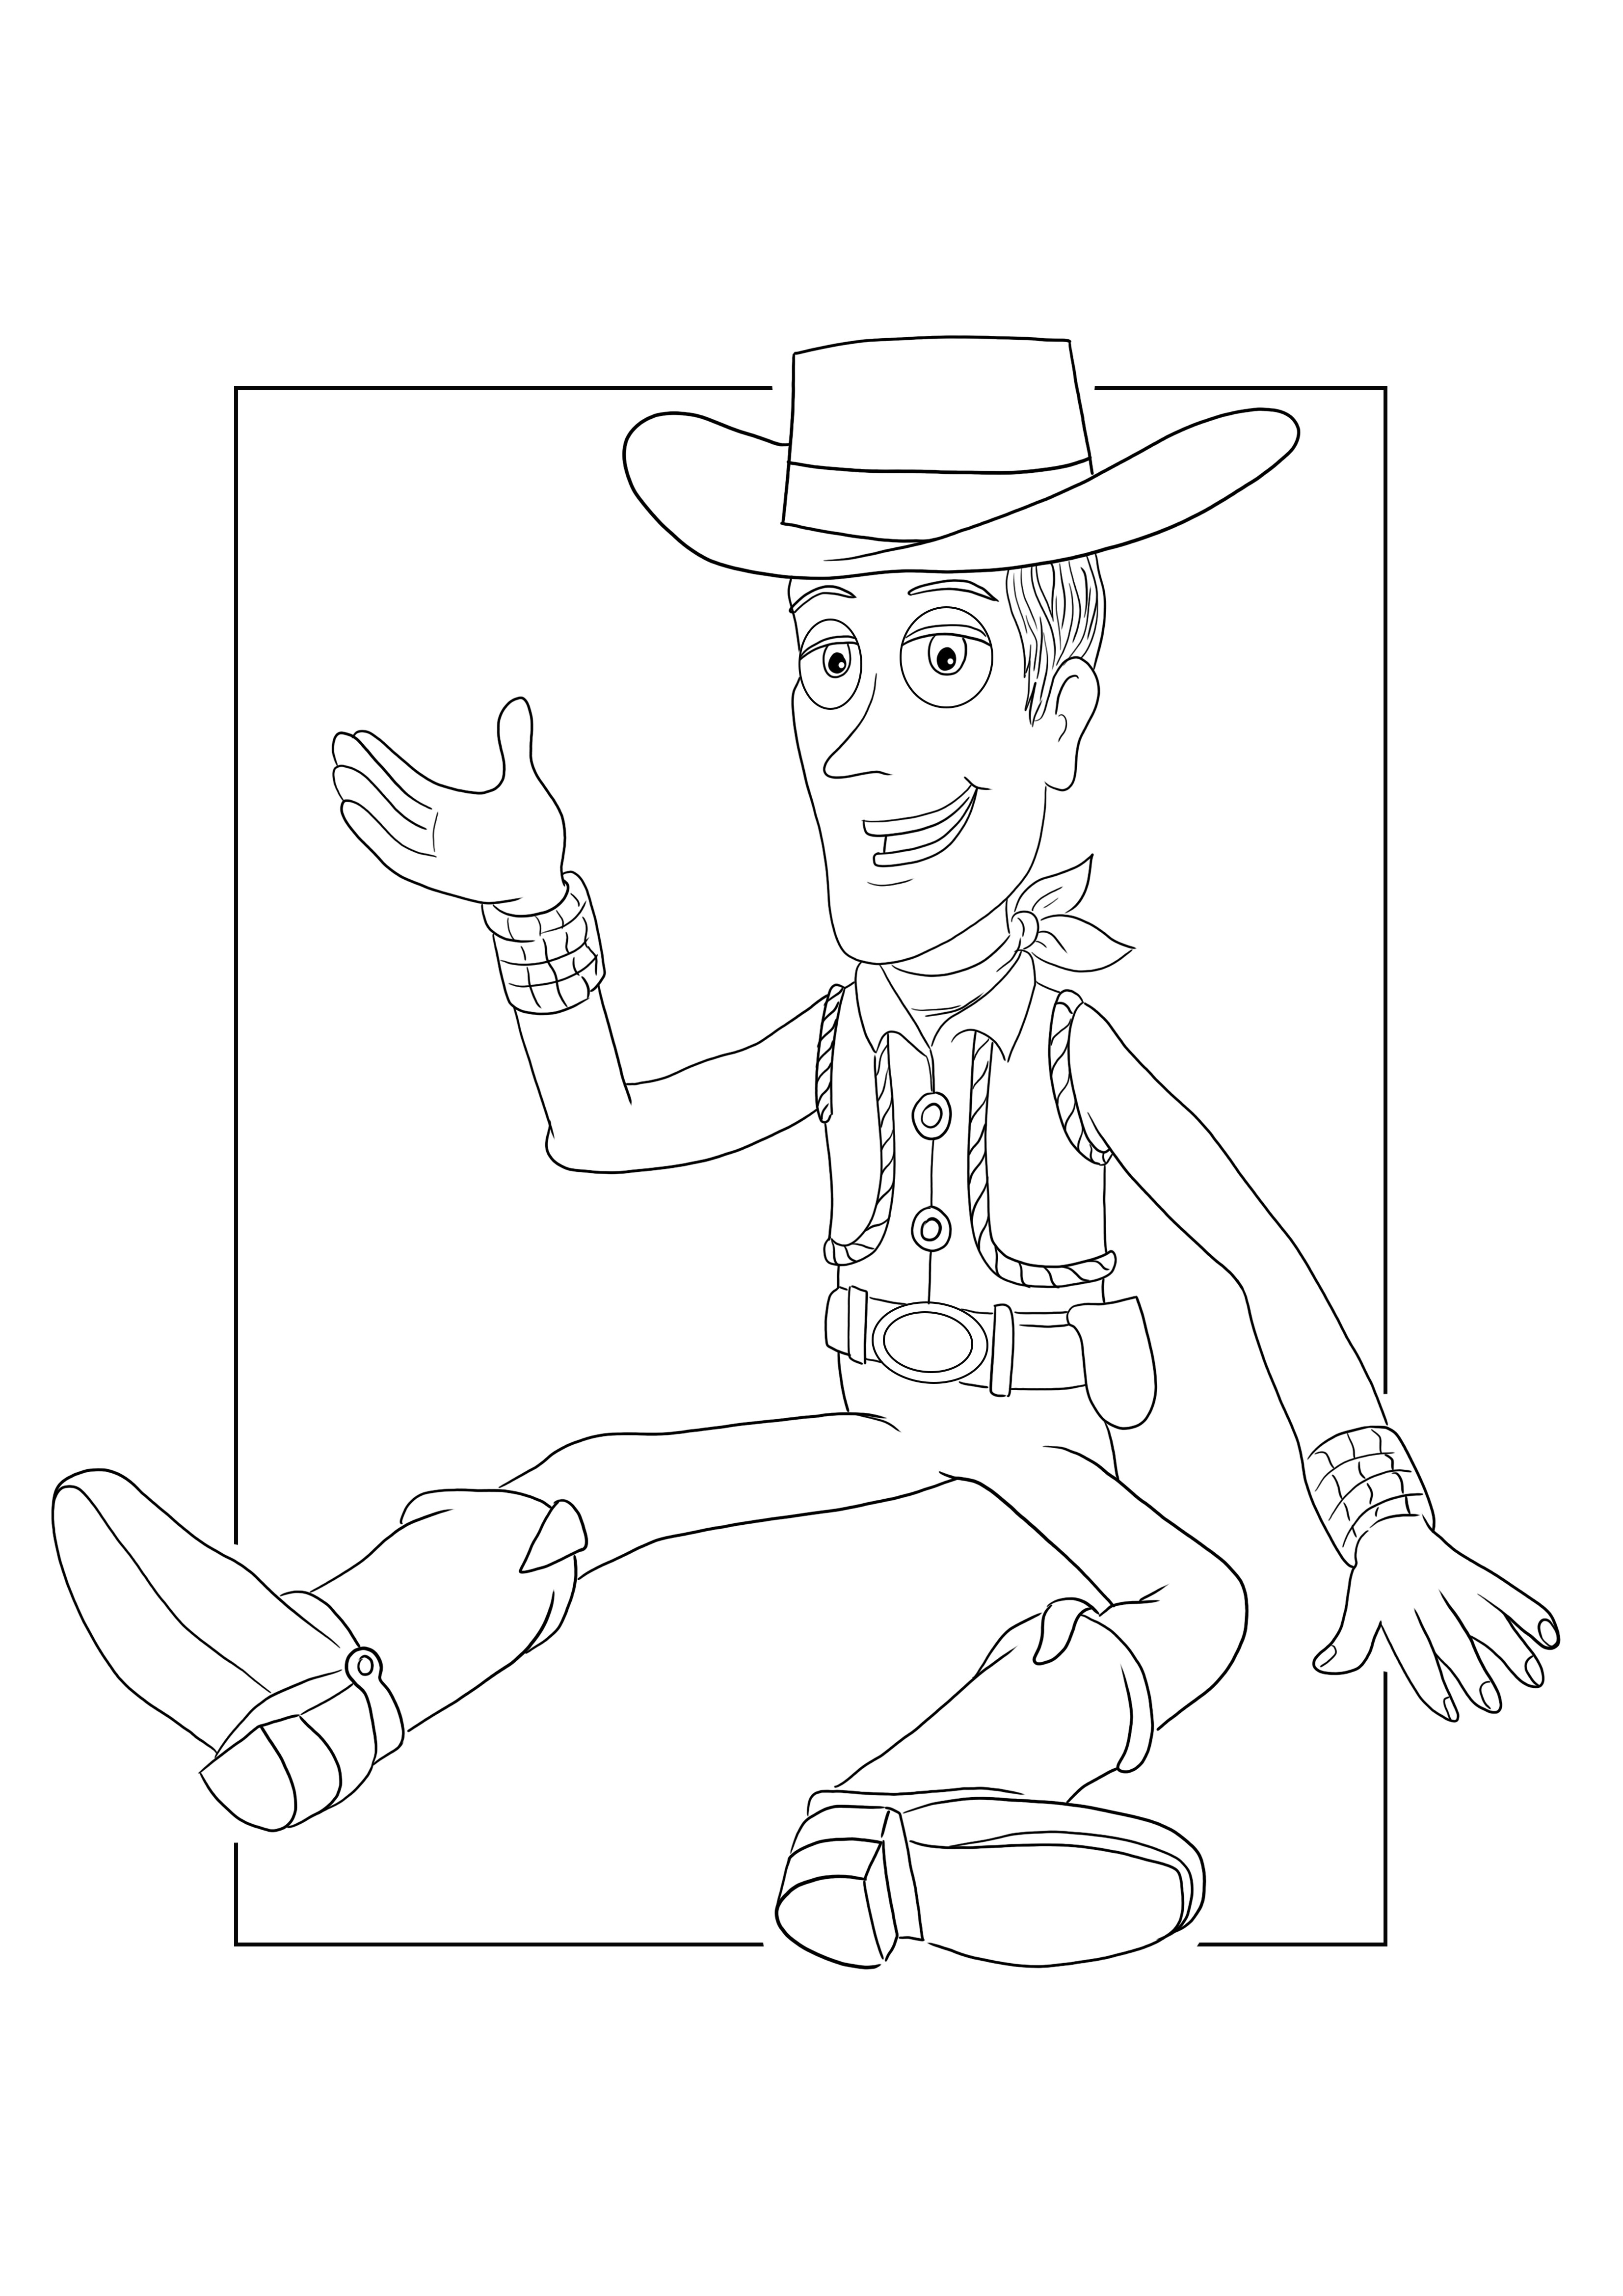 Sheriff Woody coloring and printing for free sheet for kids